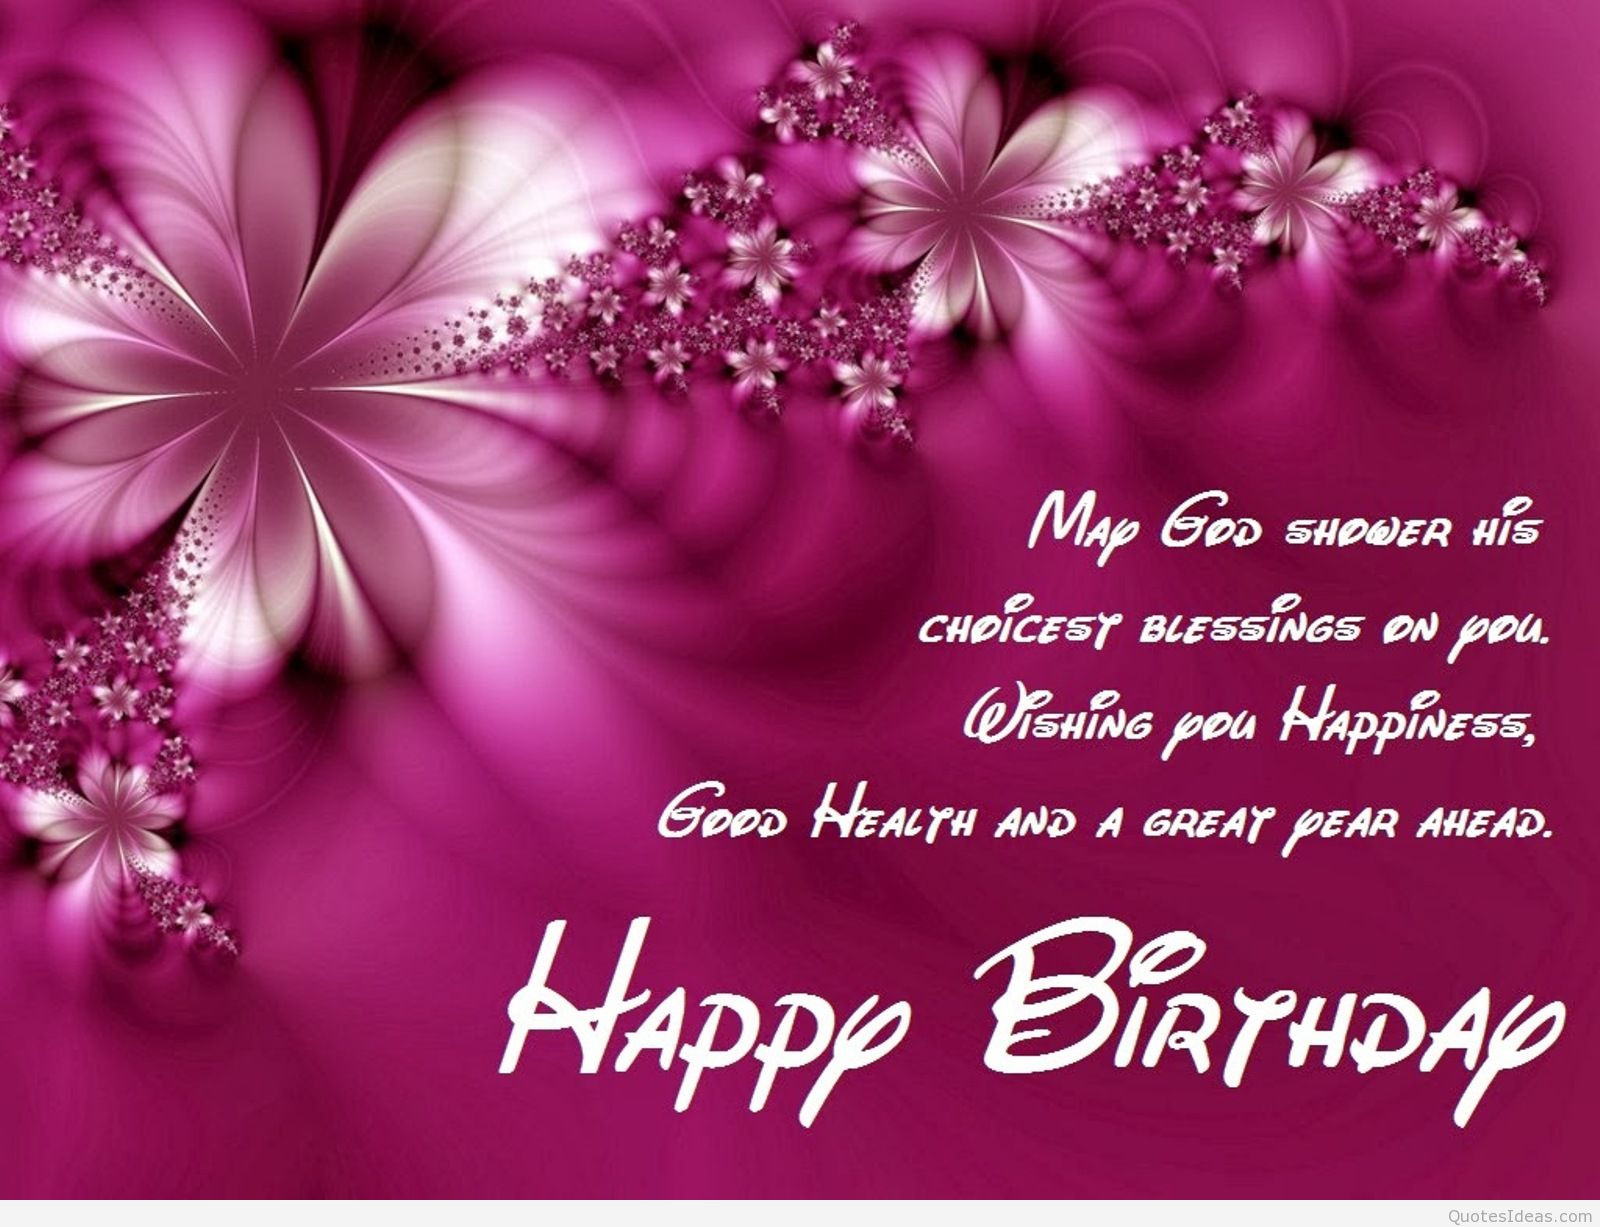 Best ideas about Birthday Quotes
. Save or Pin Happy birthday quotes images happy birthday wallpapers Now.